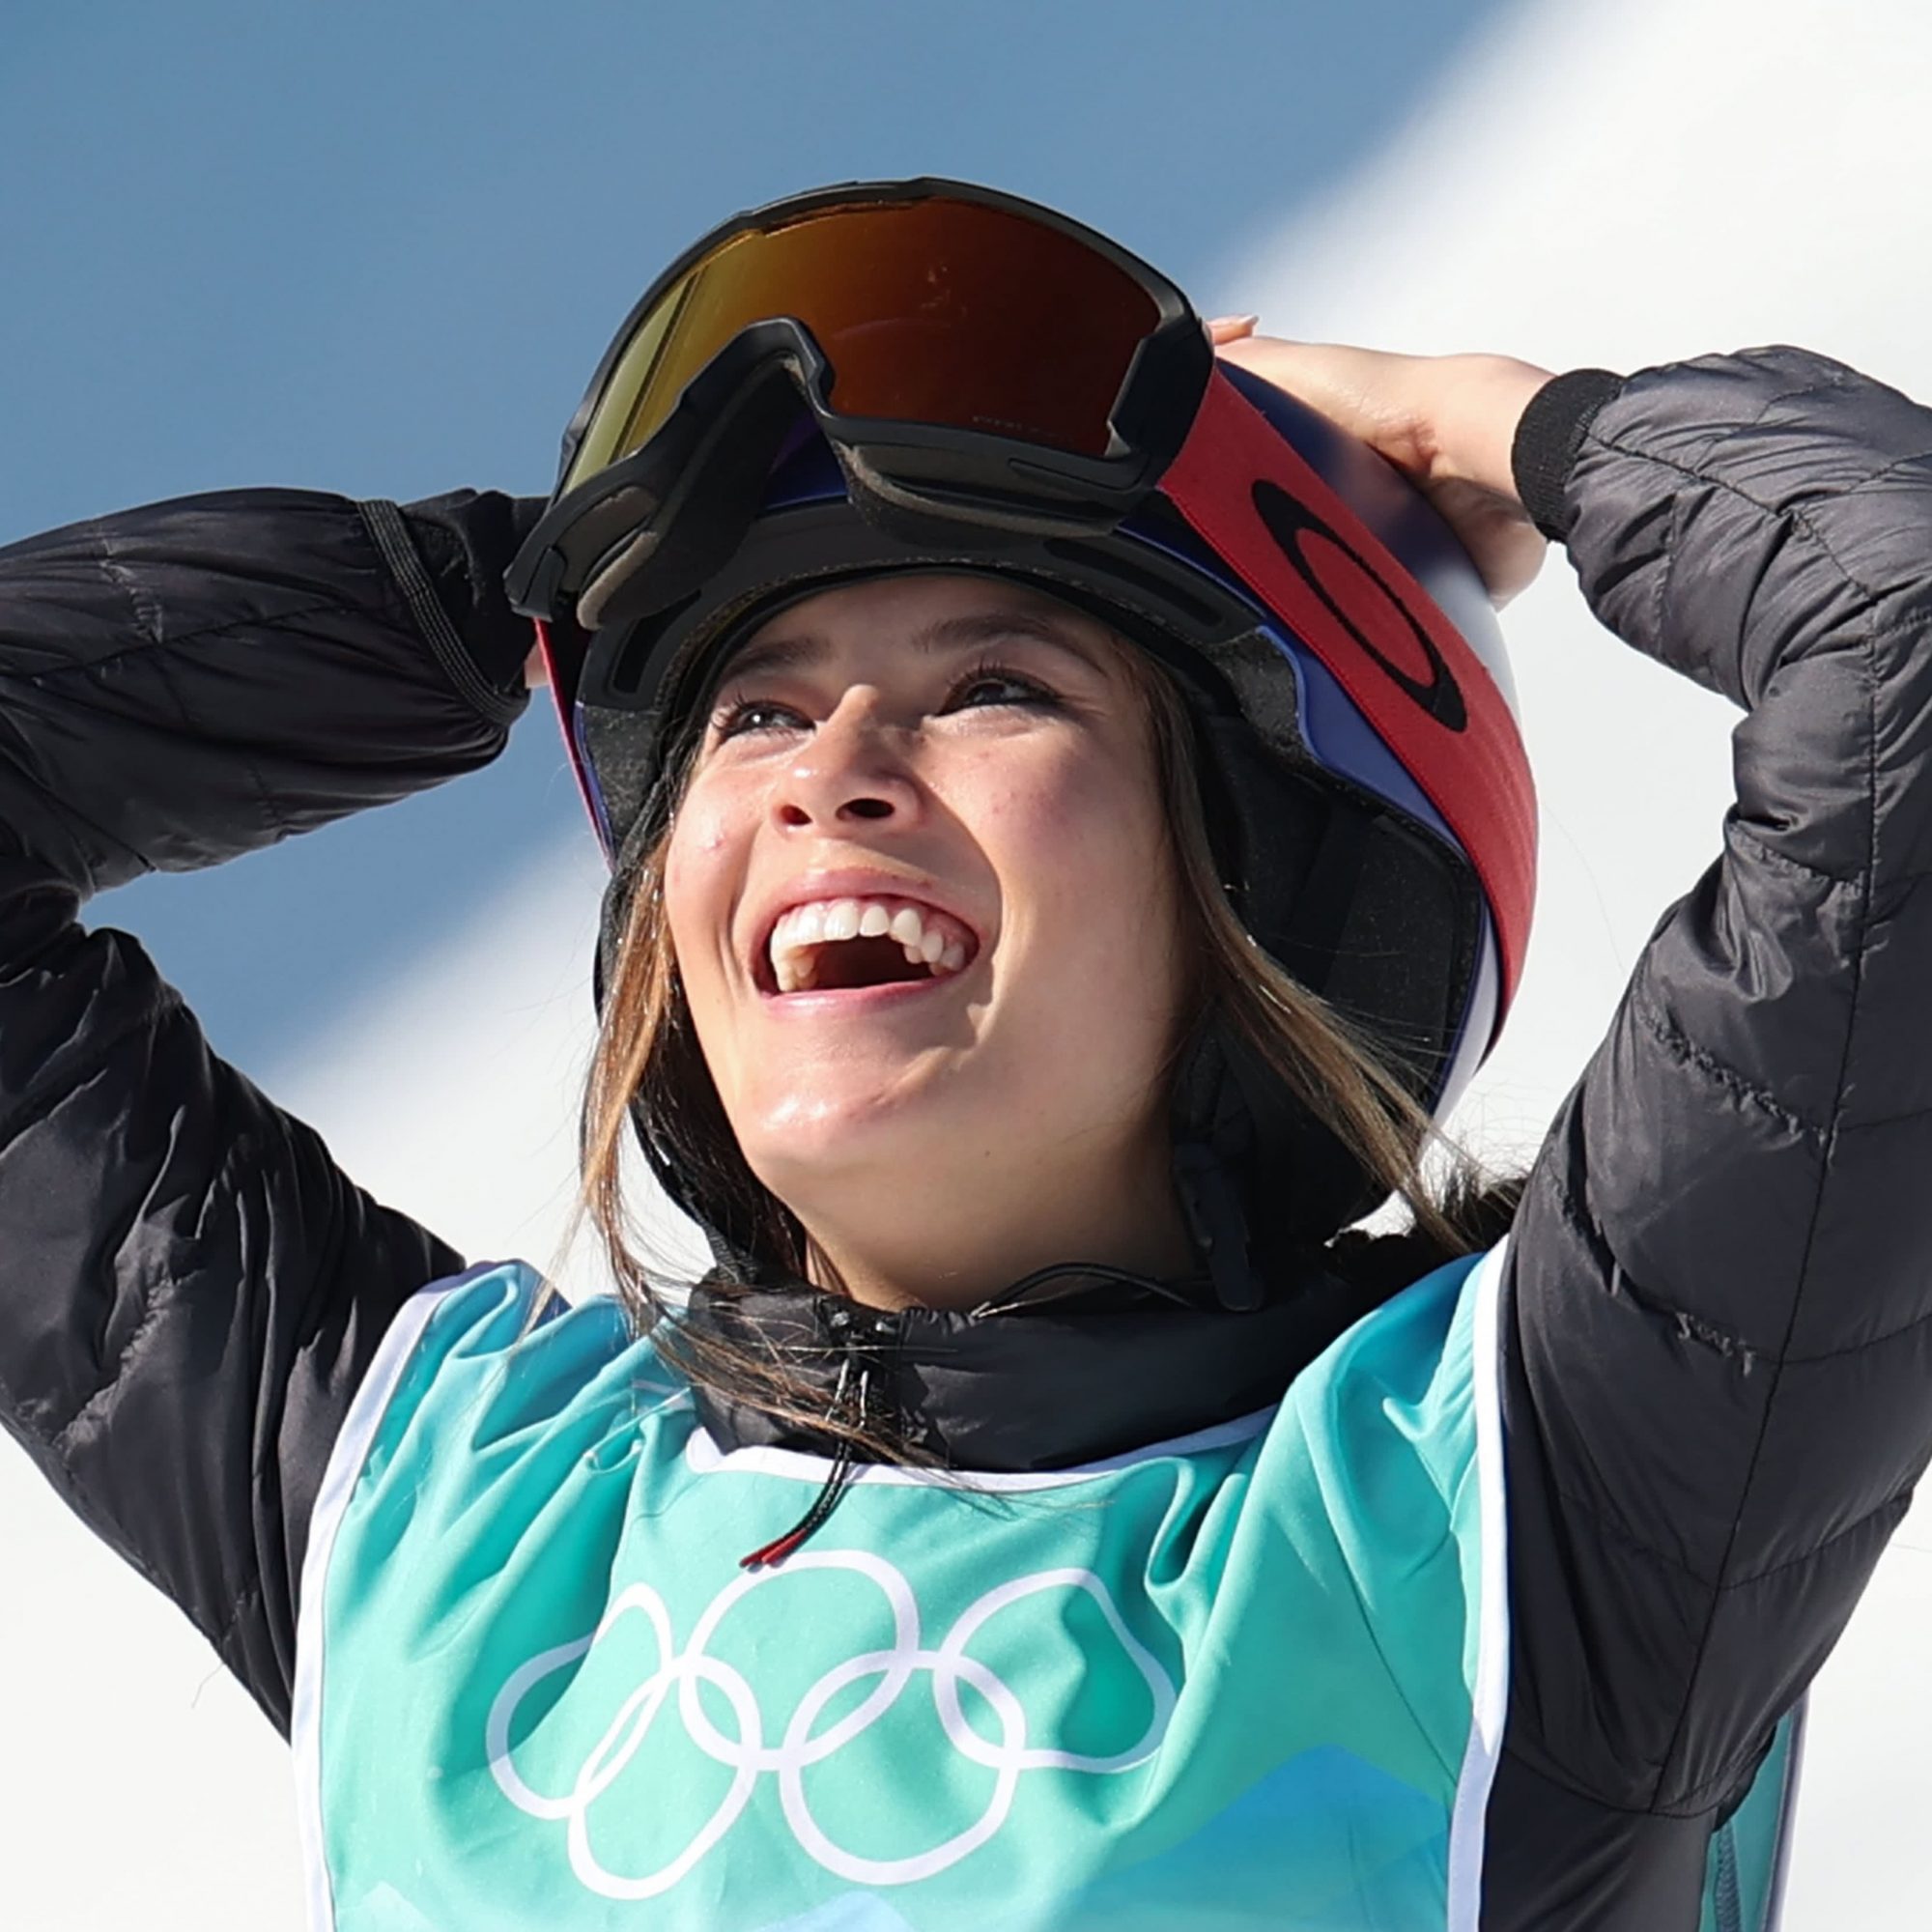 Everything you should know about Olympic skier and model Eileen Gu